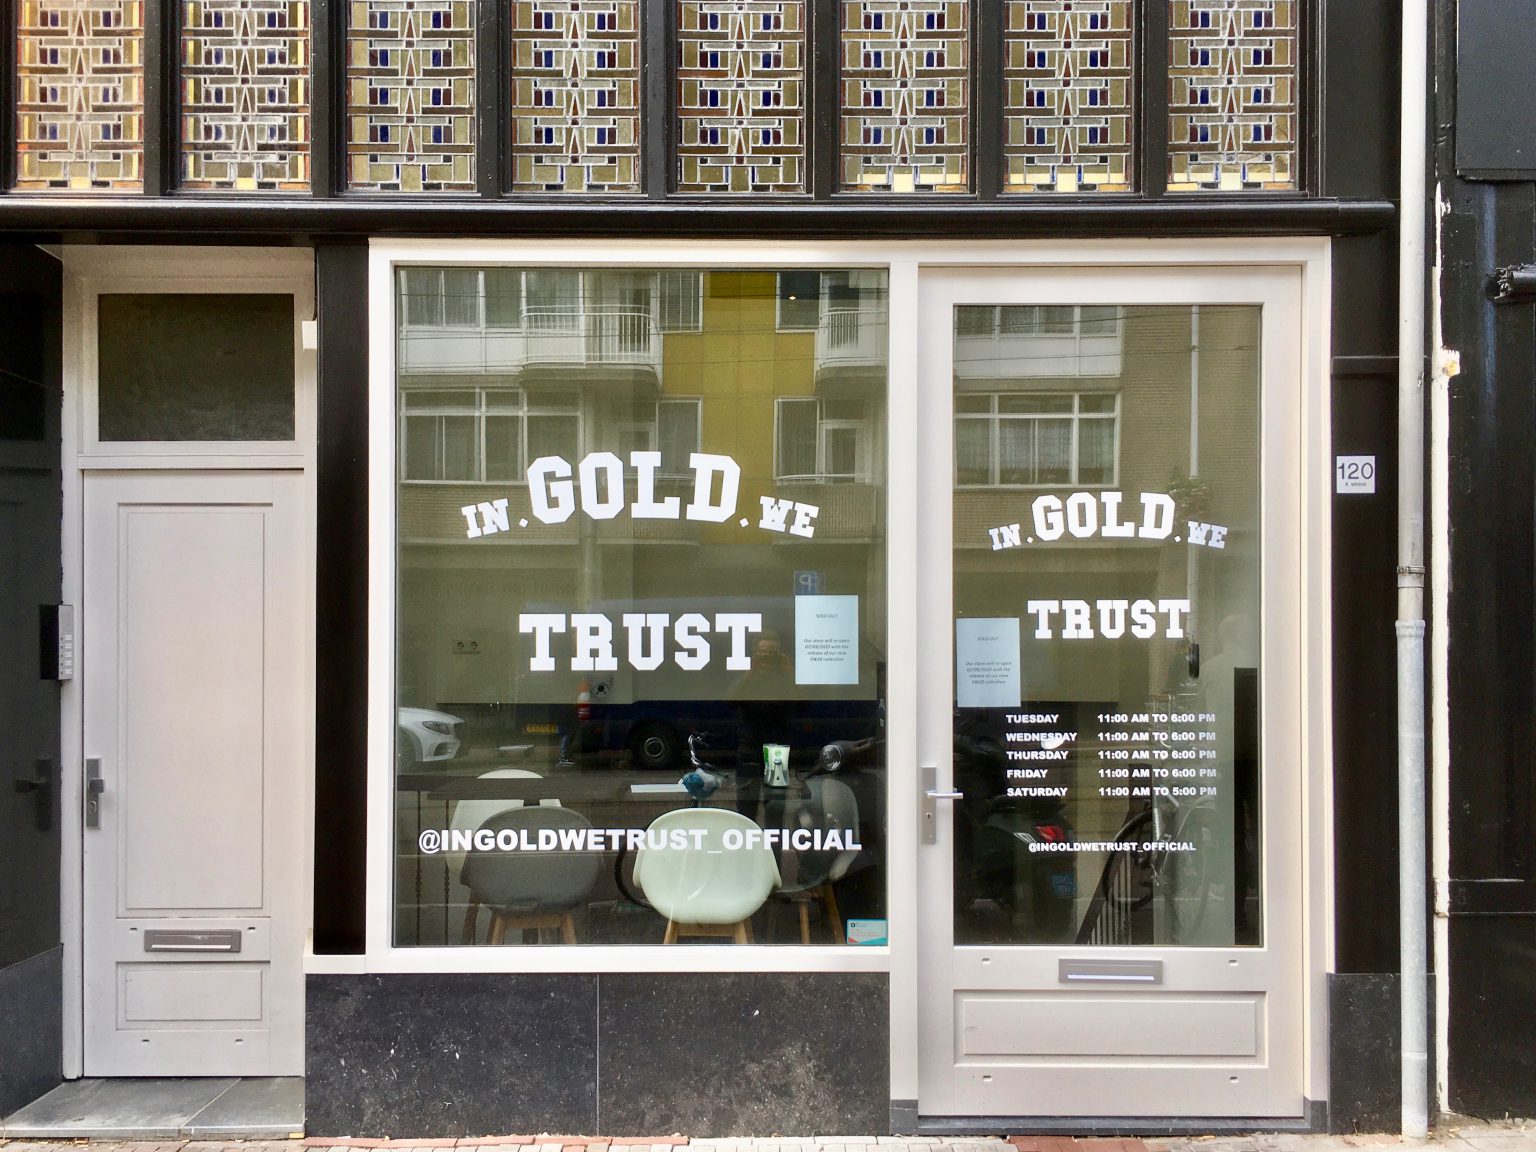 In Gold We Trust opens its first real store